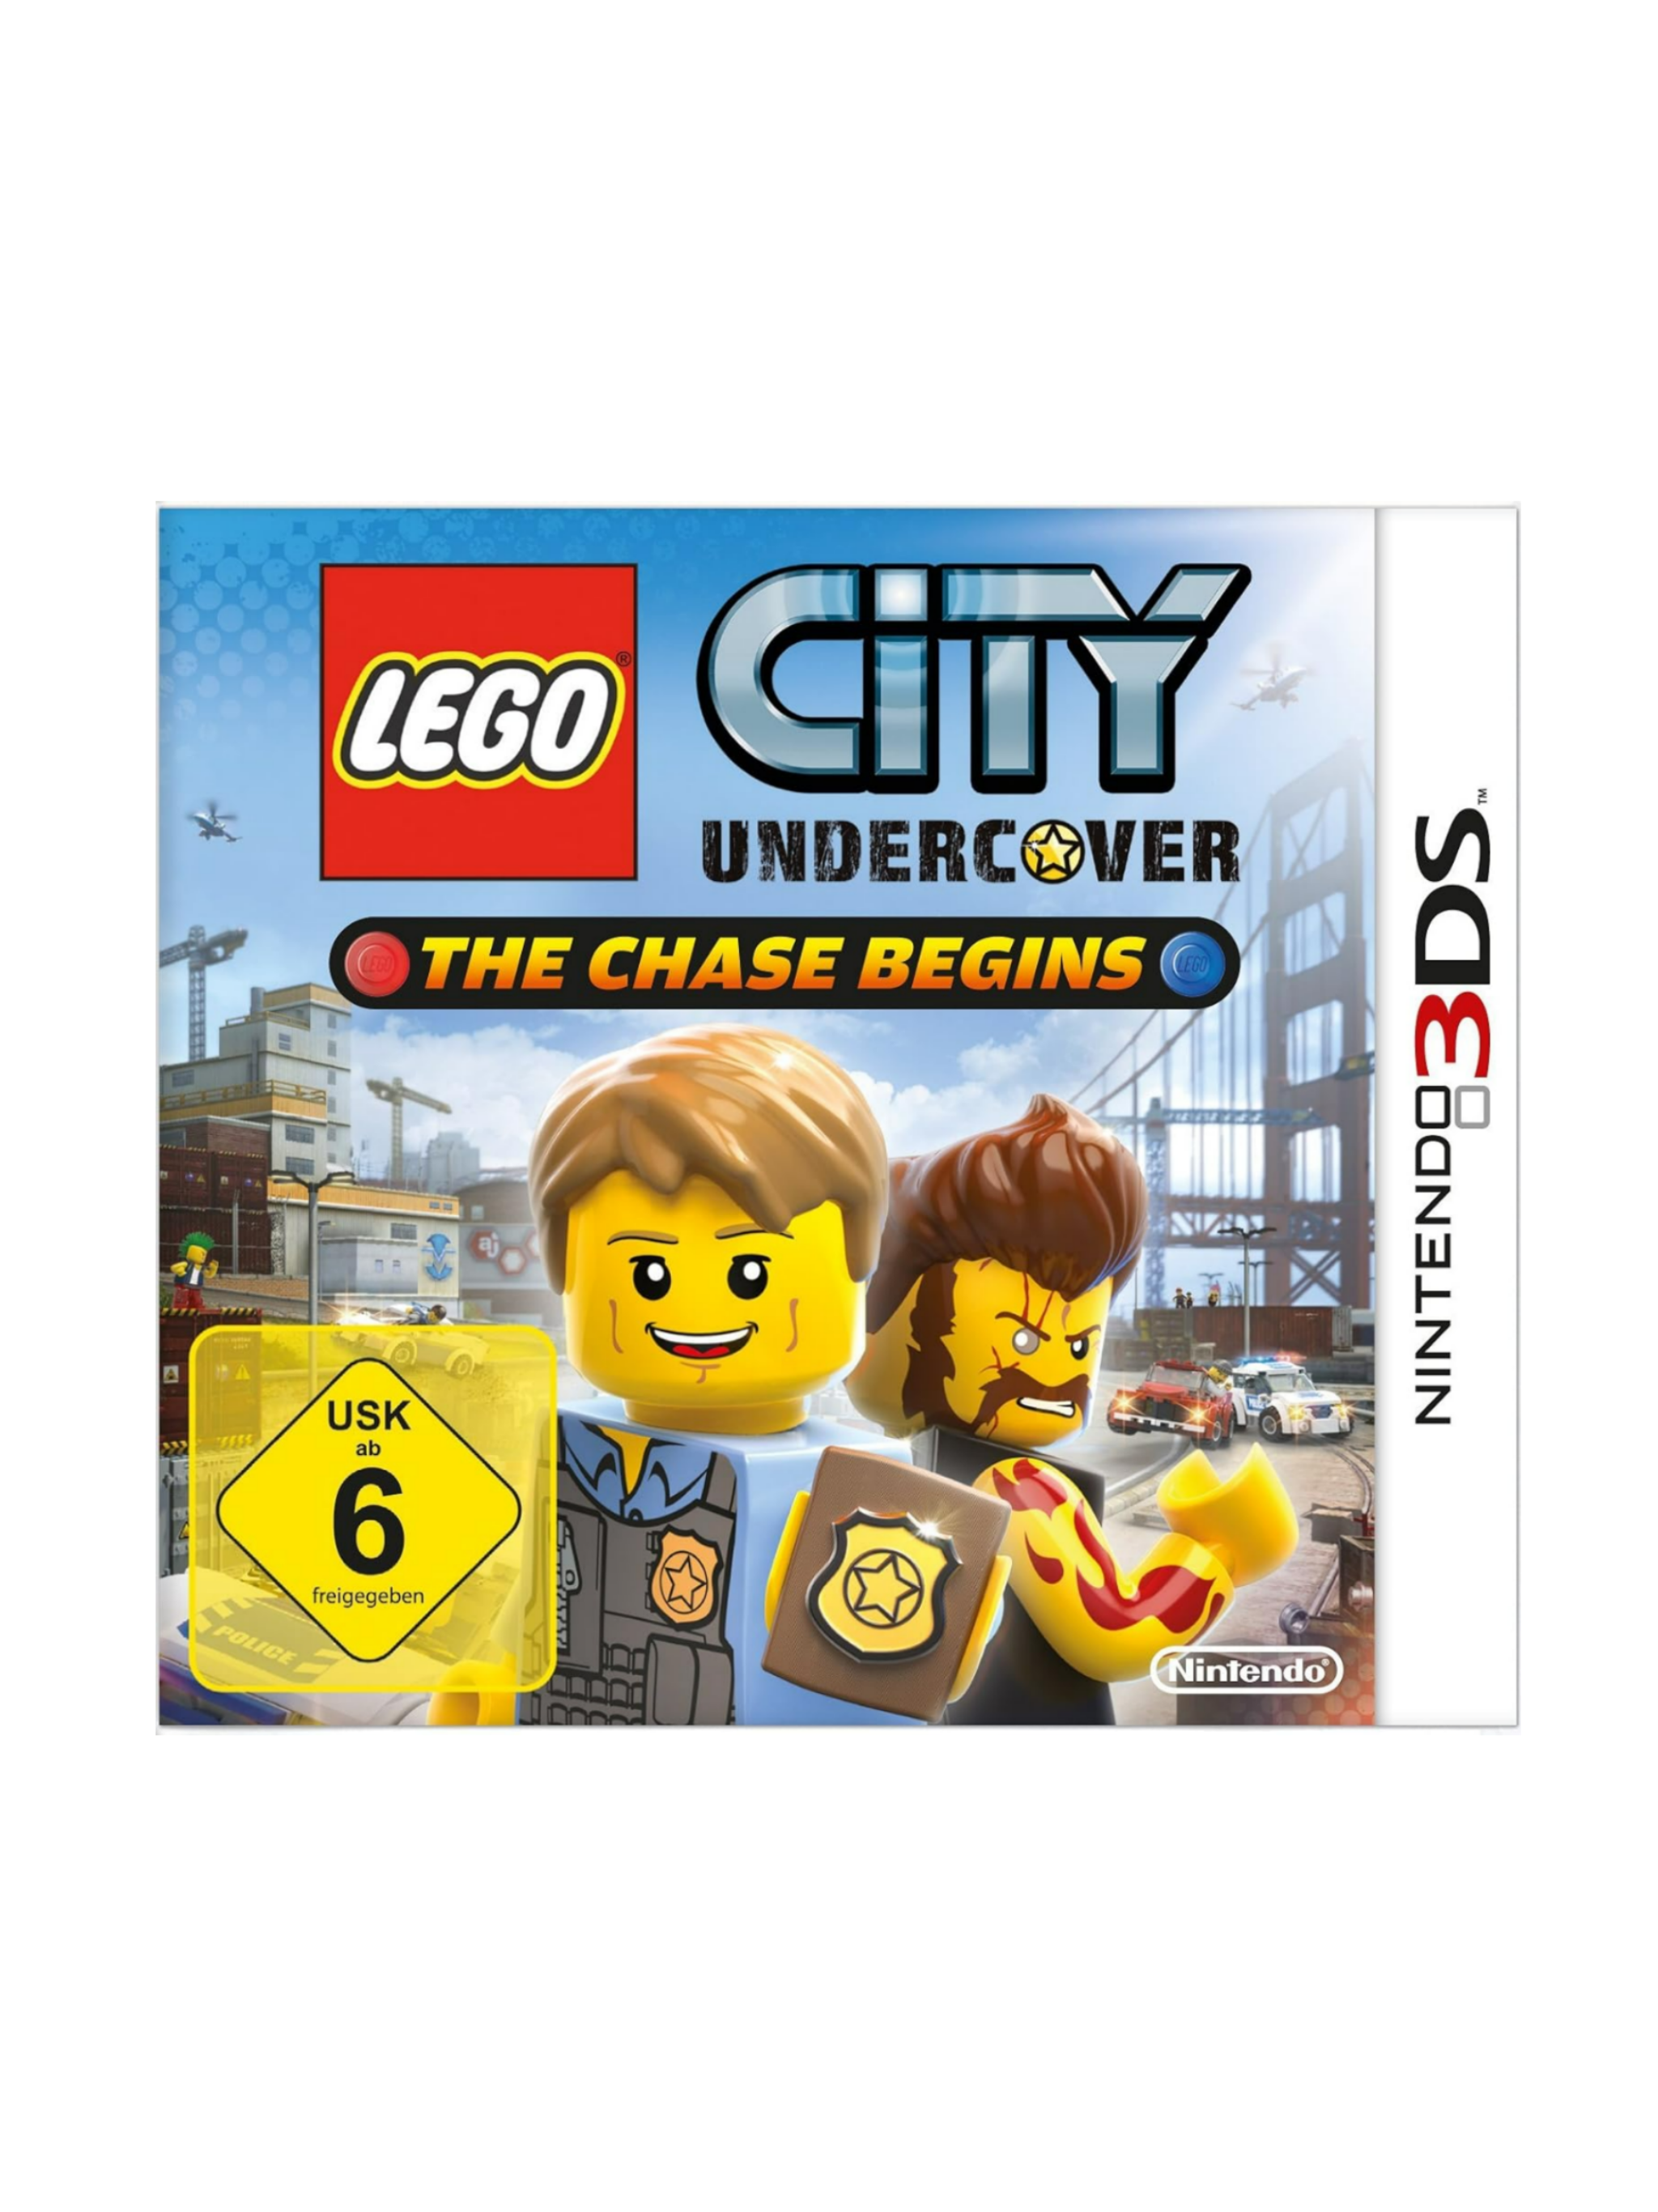 Lego City Undercover: The Chase Begins Nintendo 3DS